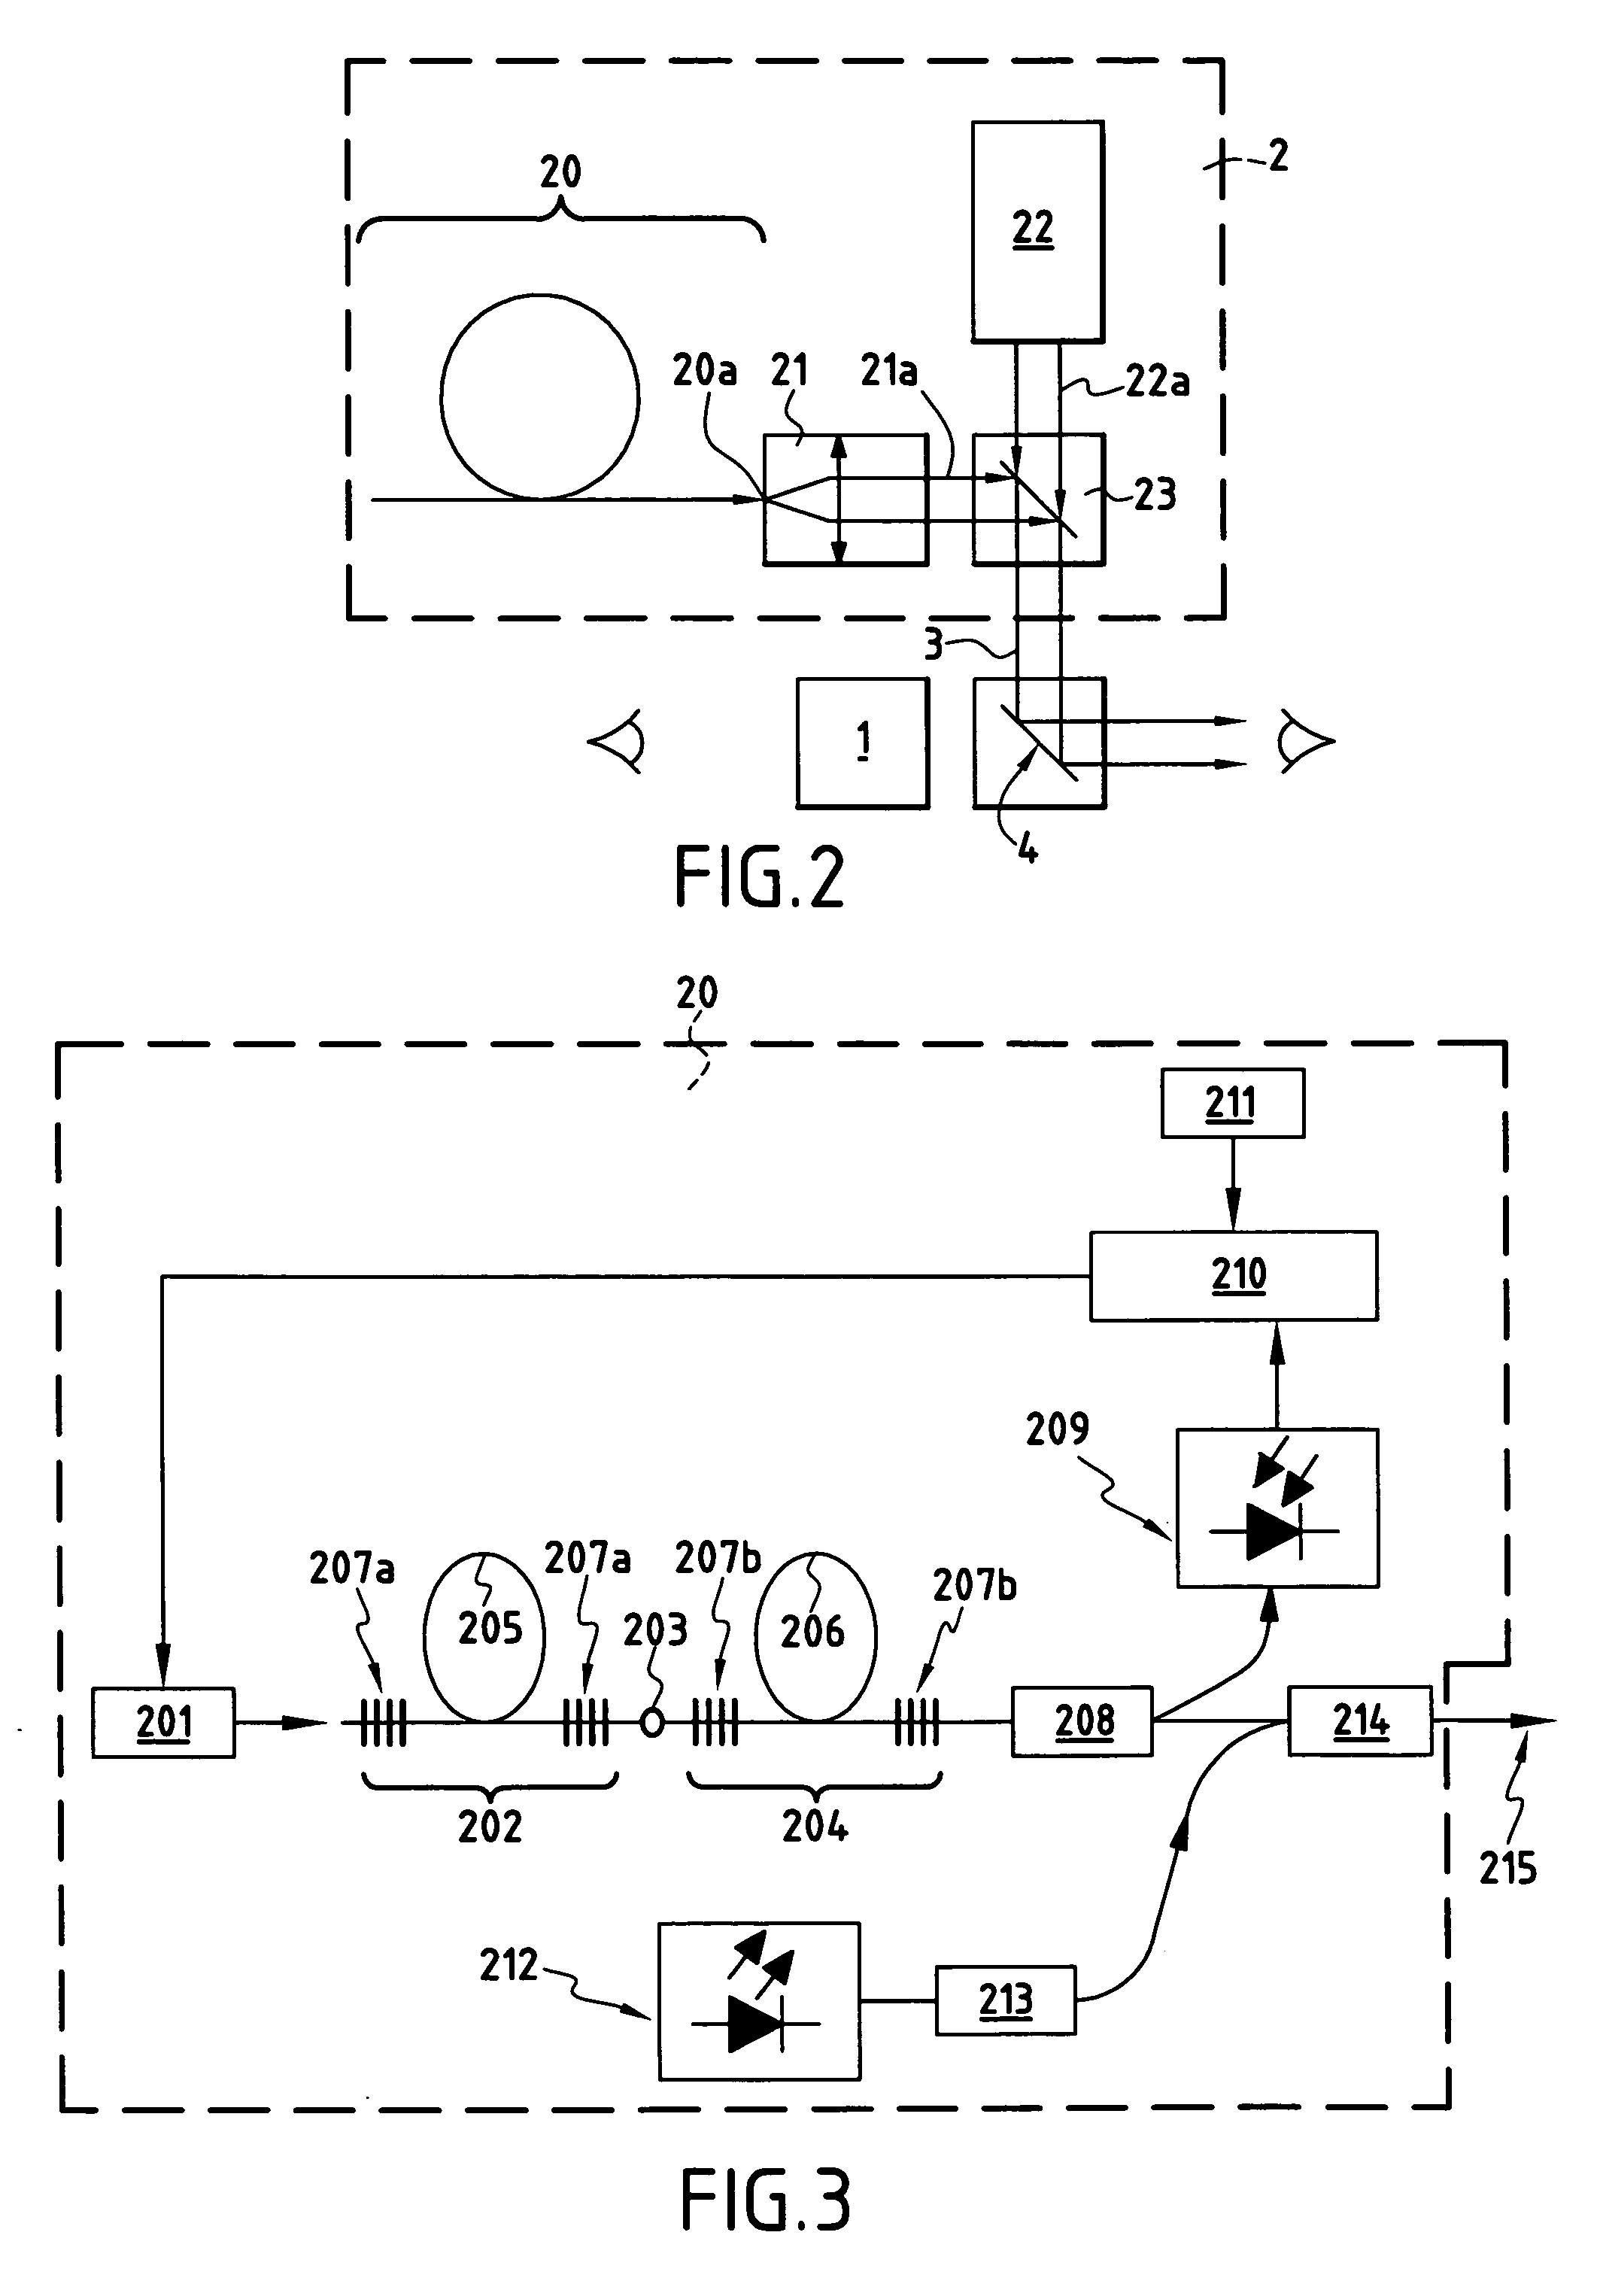 Apparatus for treating age-related maculopathy (arm)